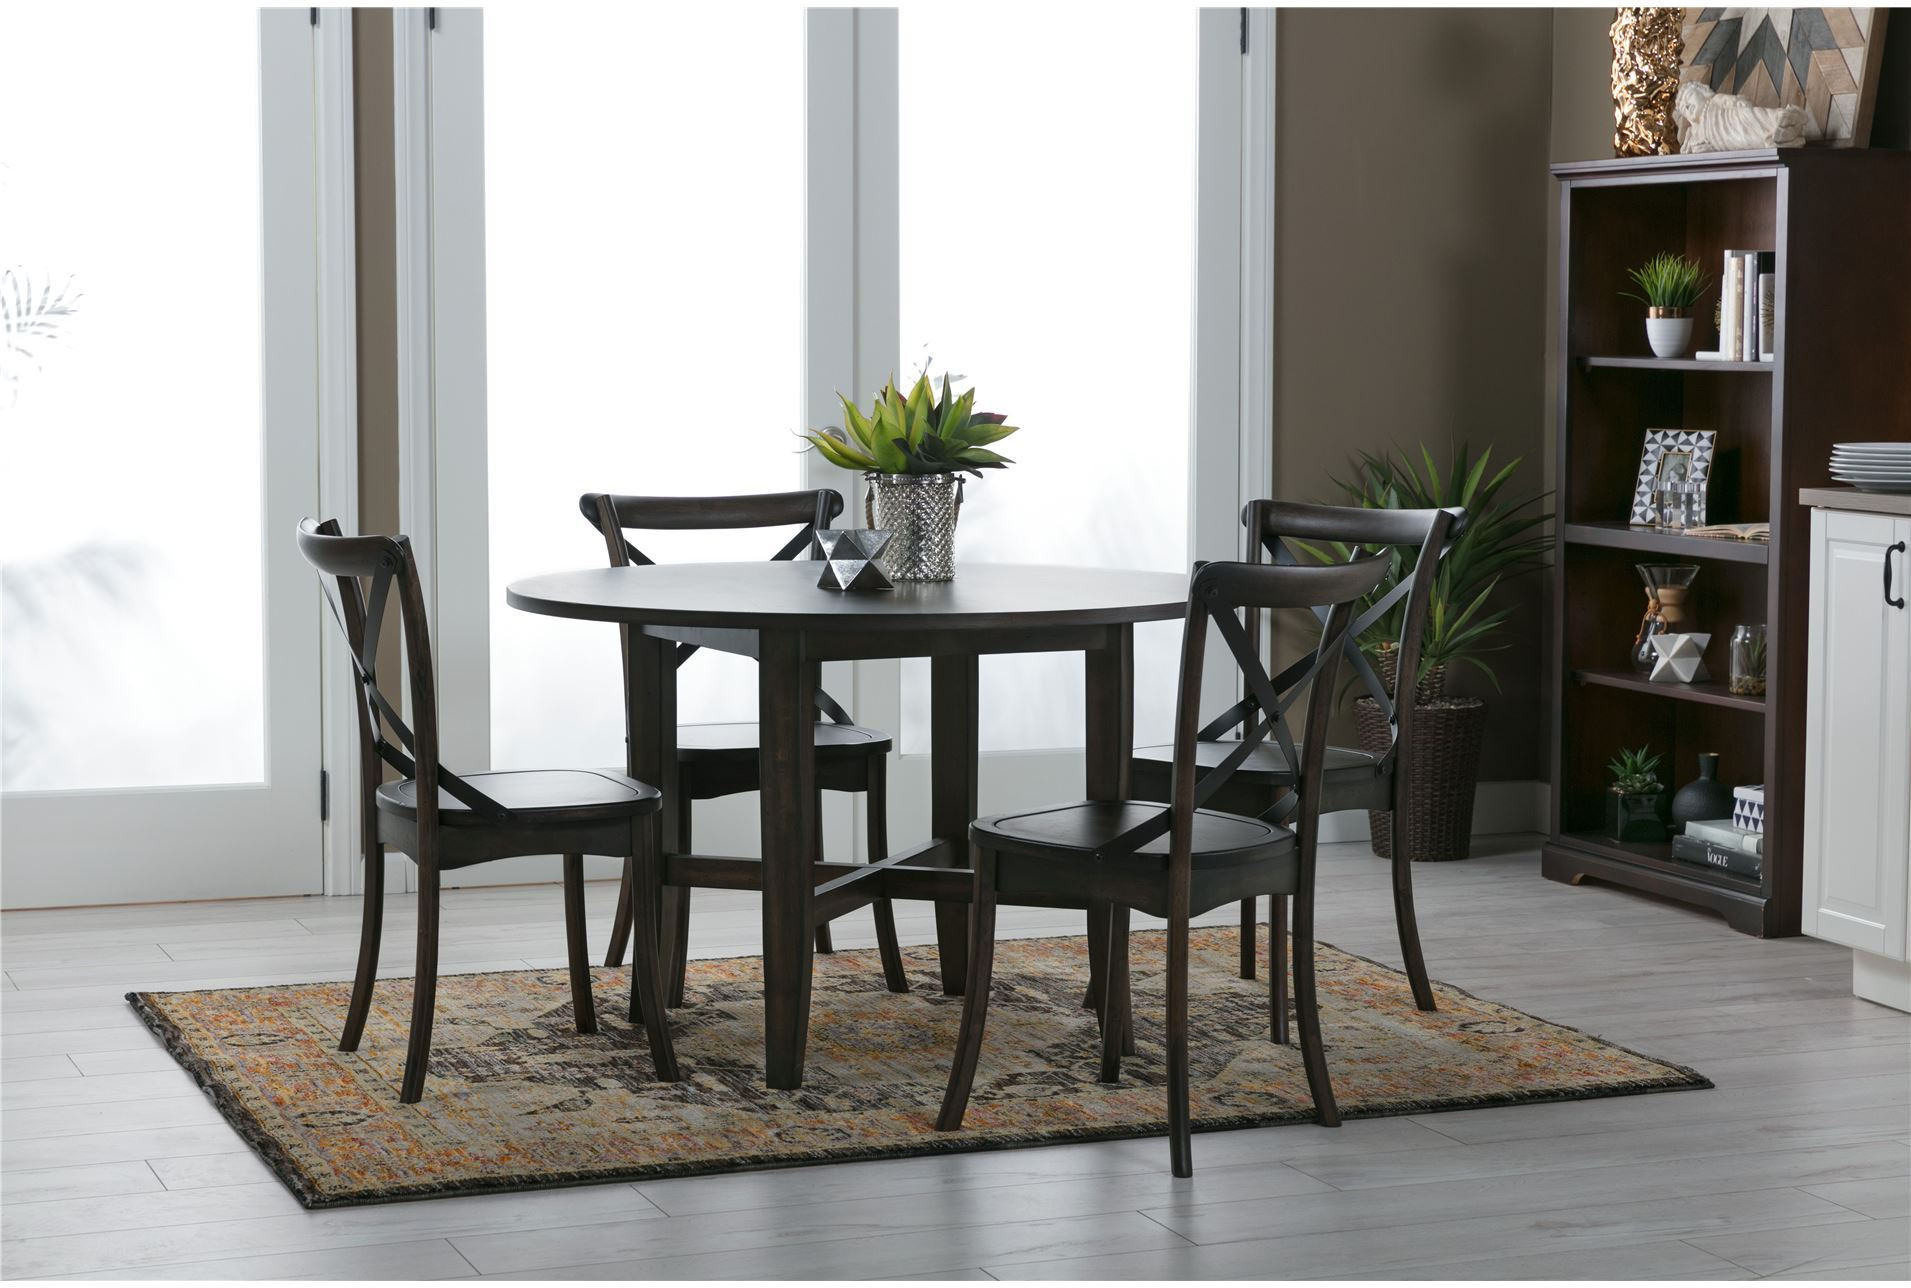 Living Spaces Dining Table
 Grady Round Dining Table Living Spaces